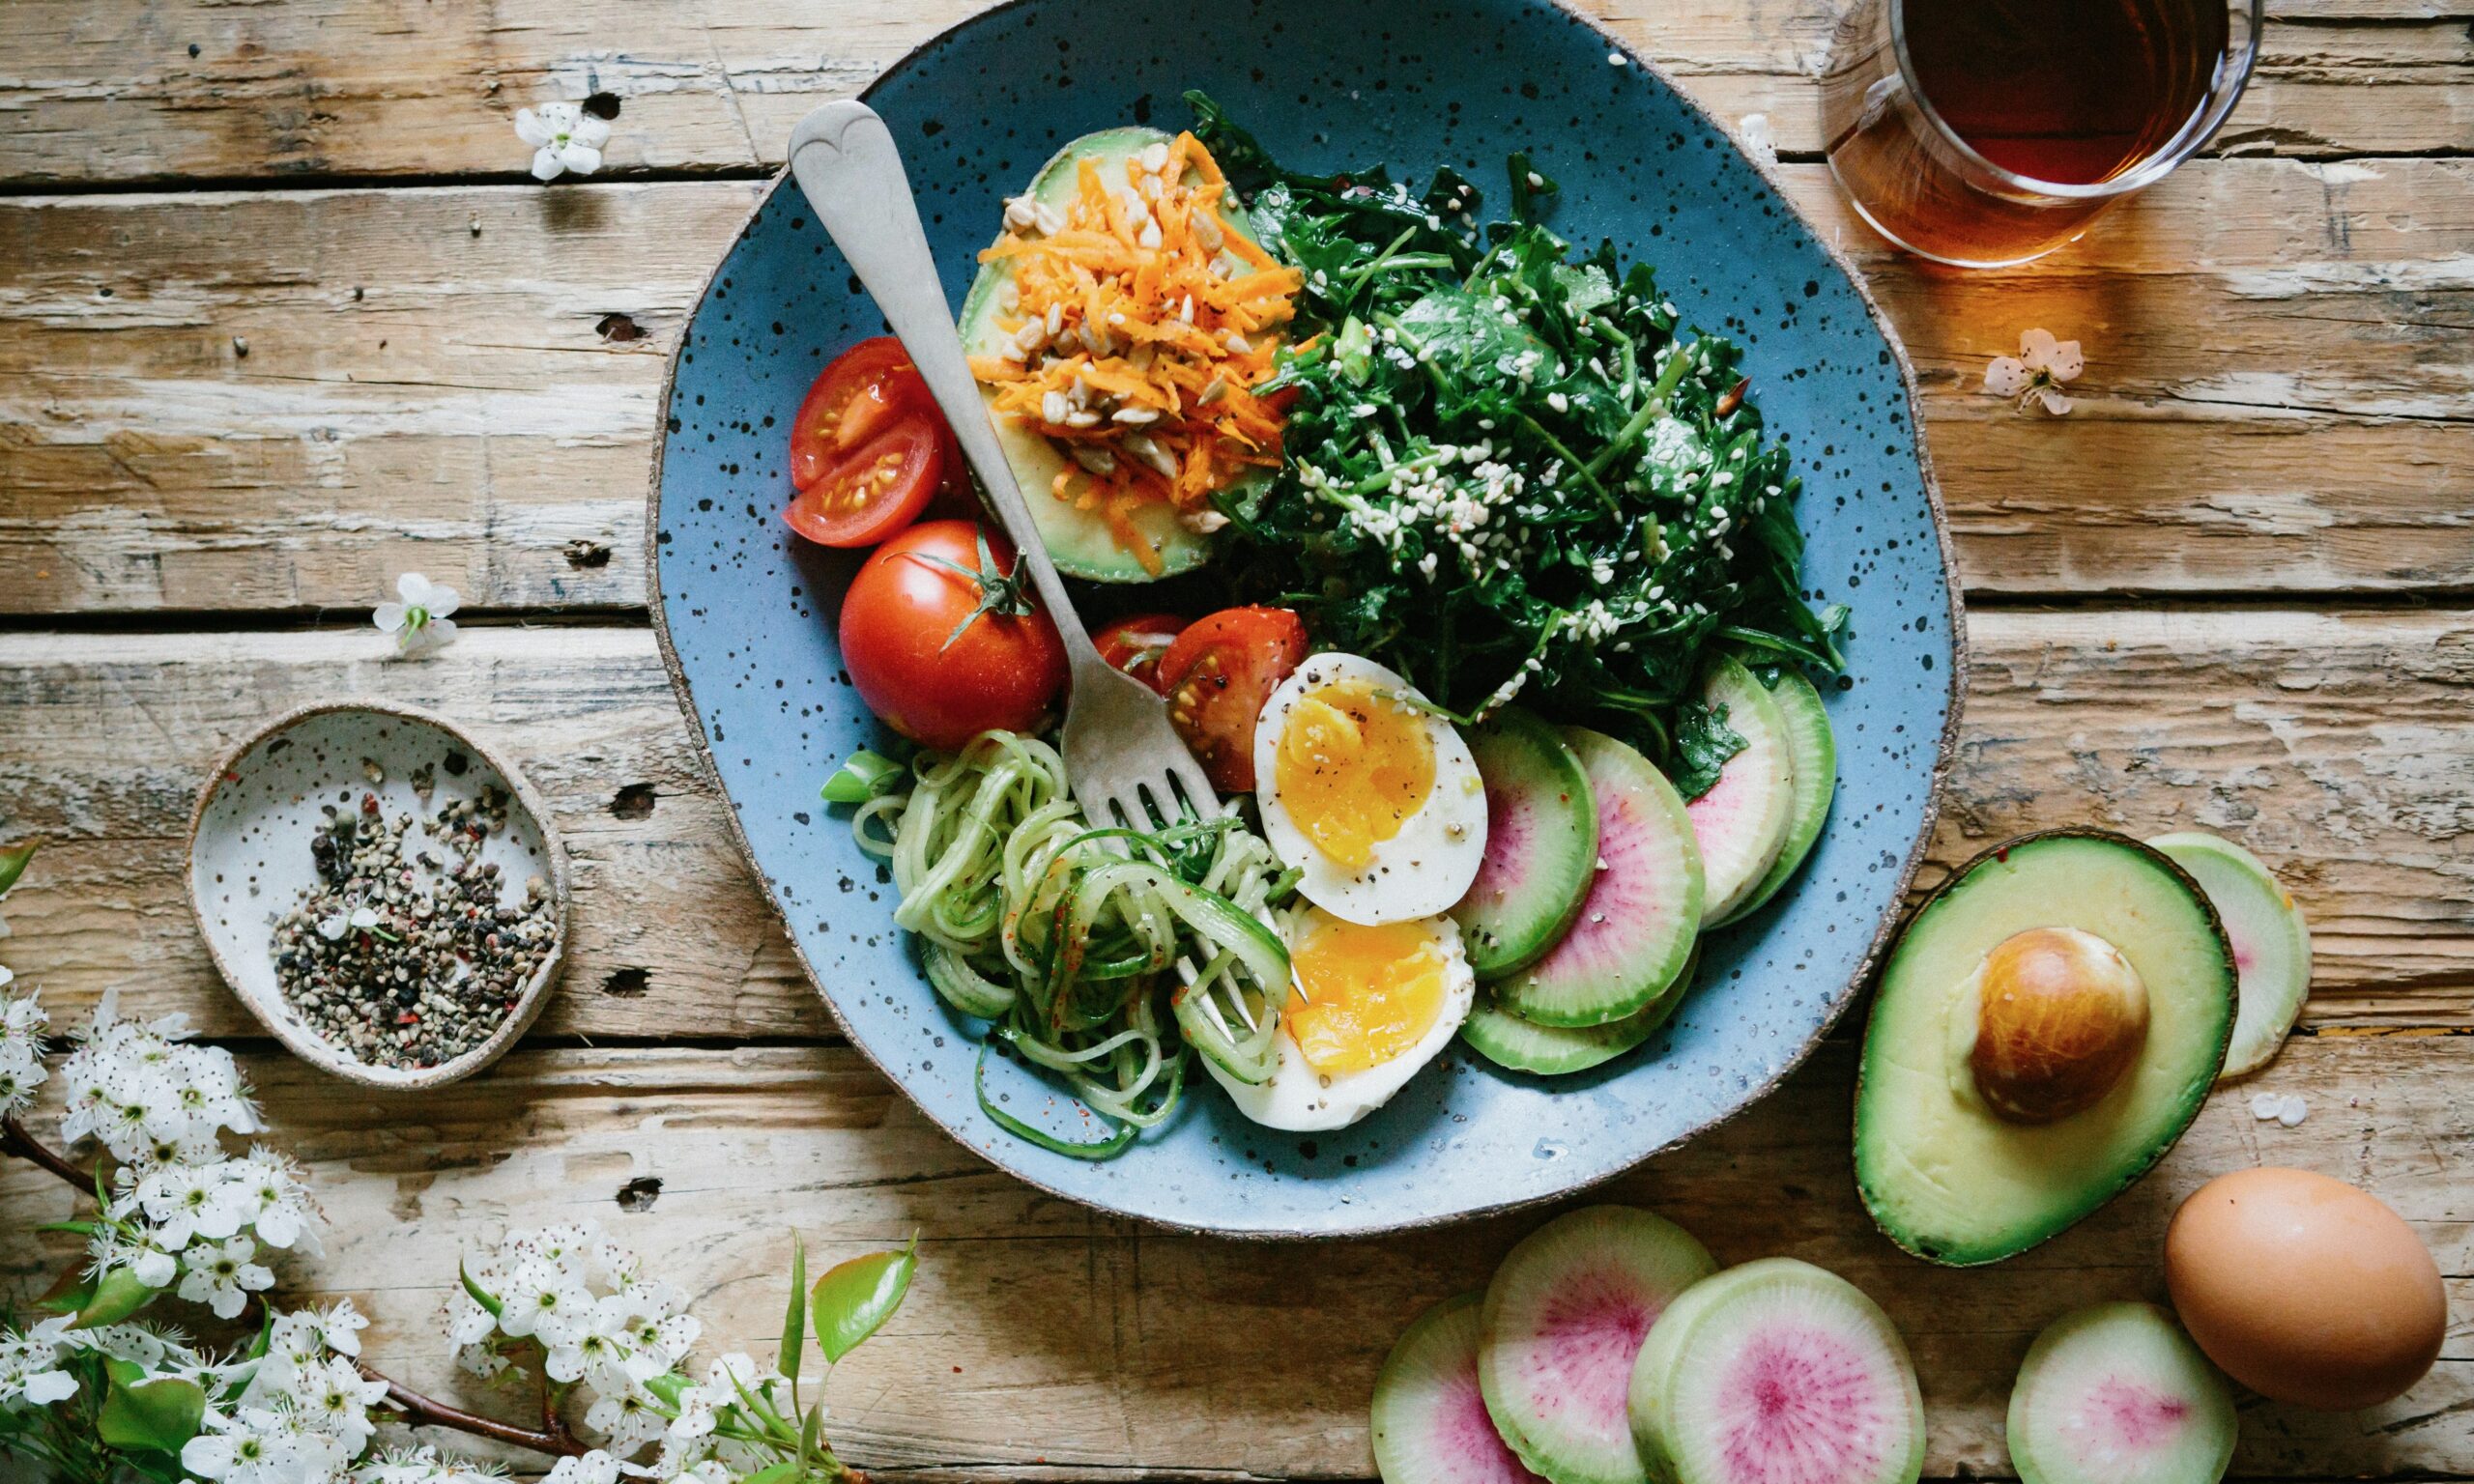 A blue ceramic bowl sitting on a wood table is filled with an avocado, an egg, radishes, sauteed greens and tomatoes. An avocado and radishes are featured on the table next to the bowl.